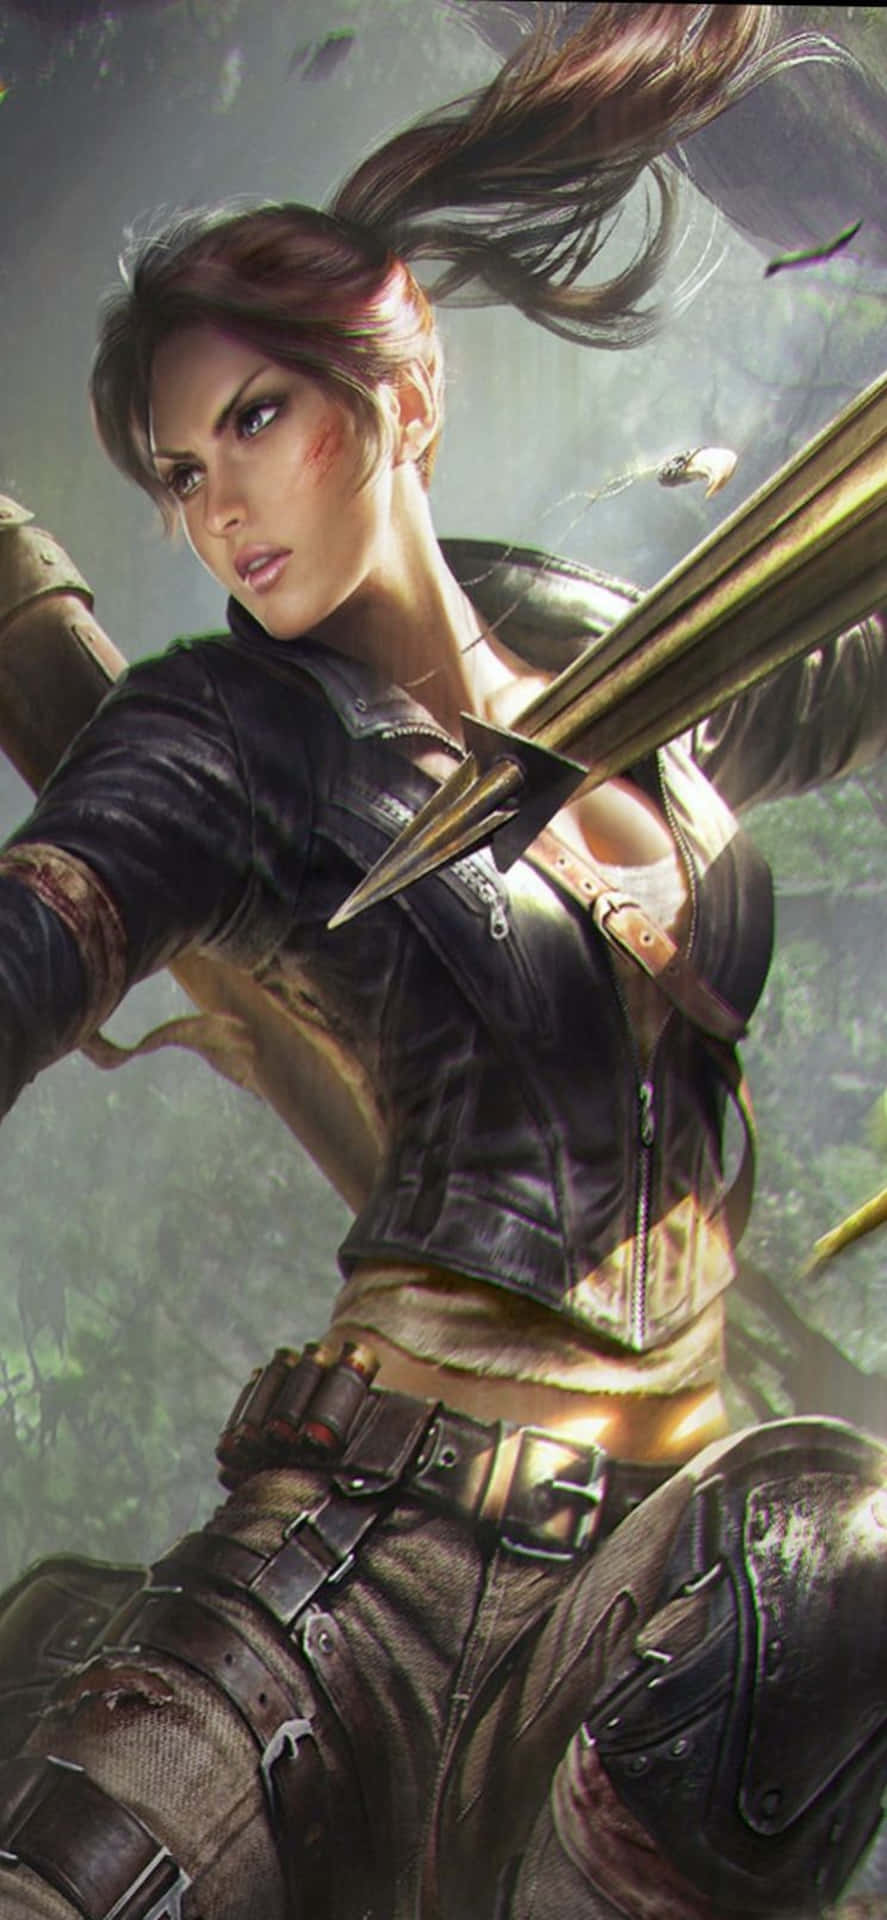 A Woman Holding A Sword In The Jungle